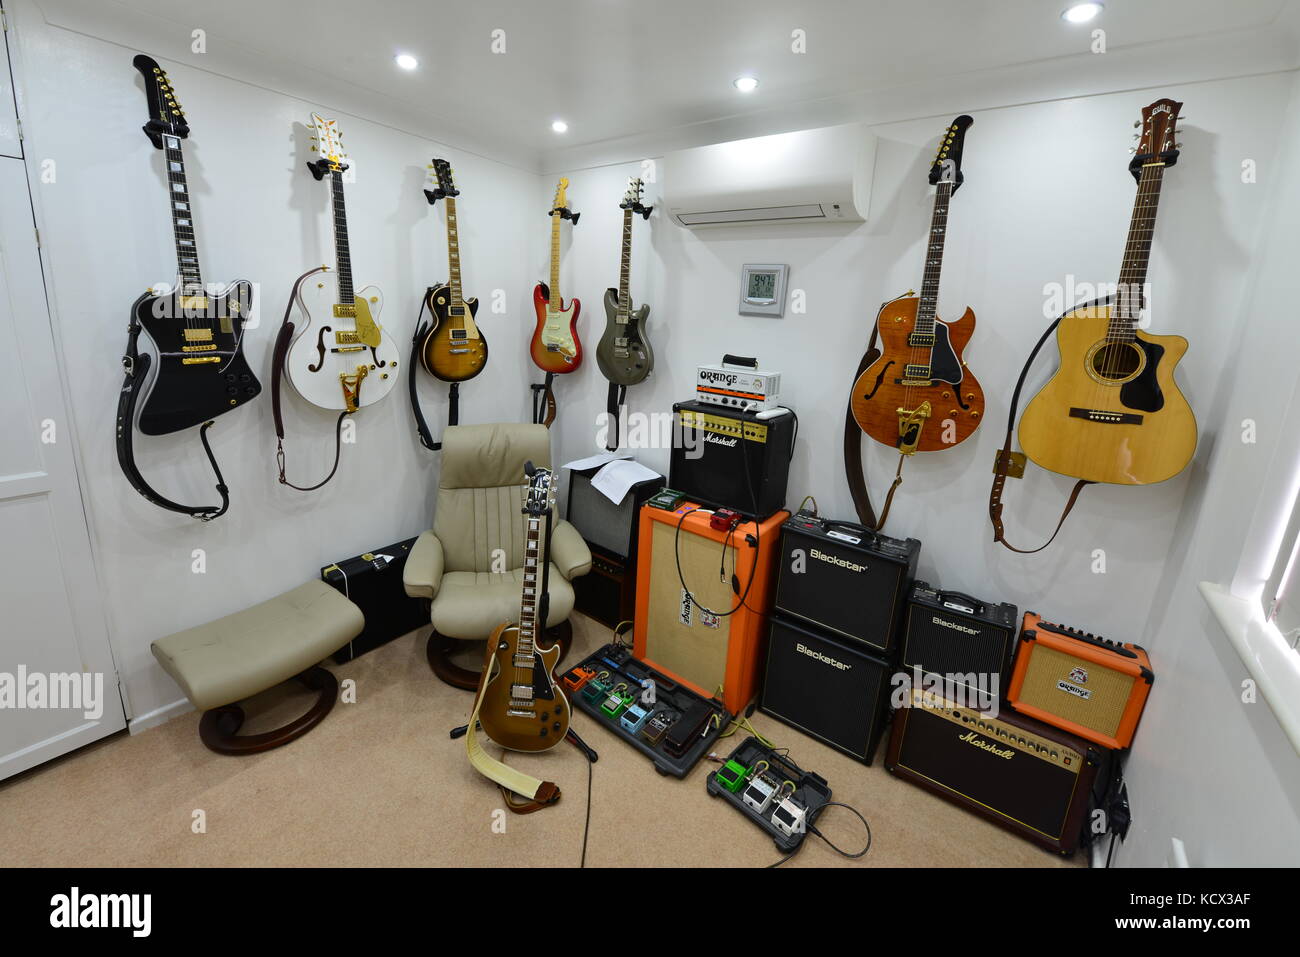 A guitar music room. Stock Photo